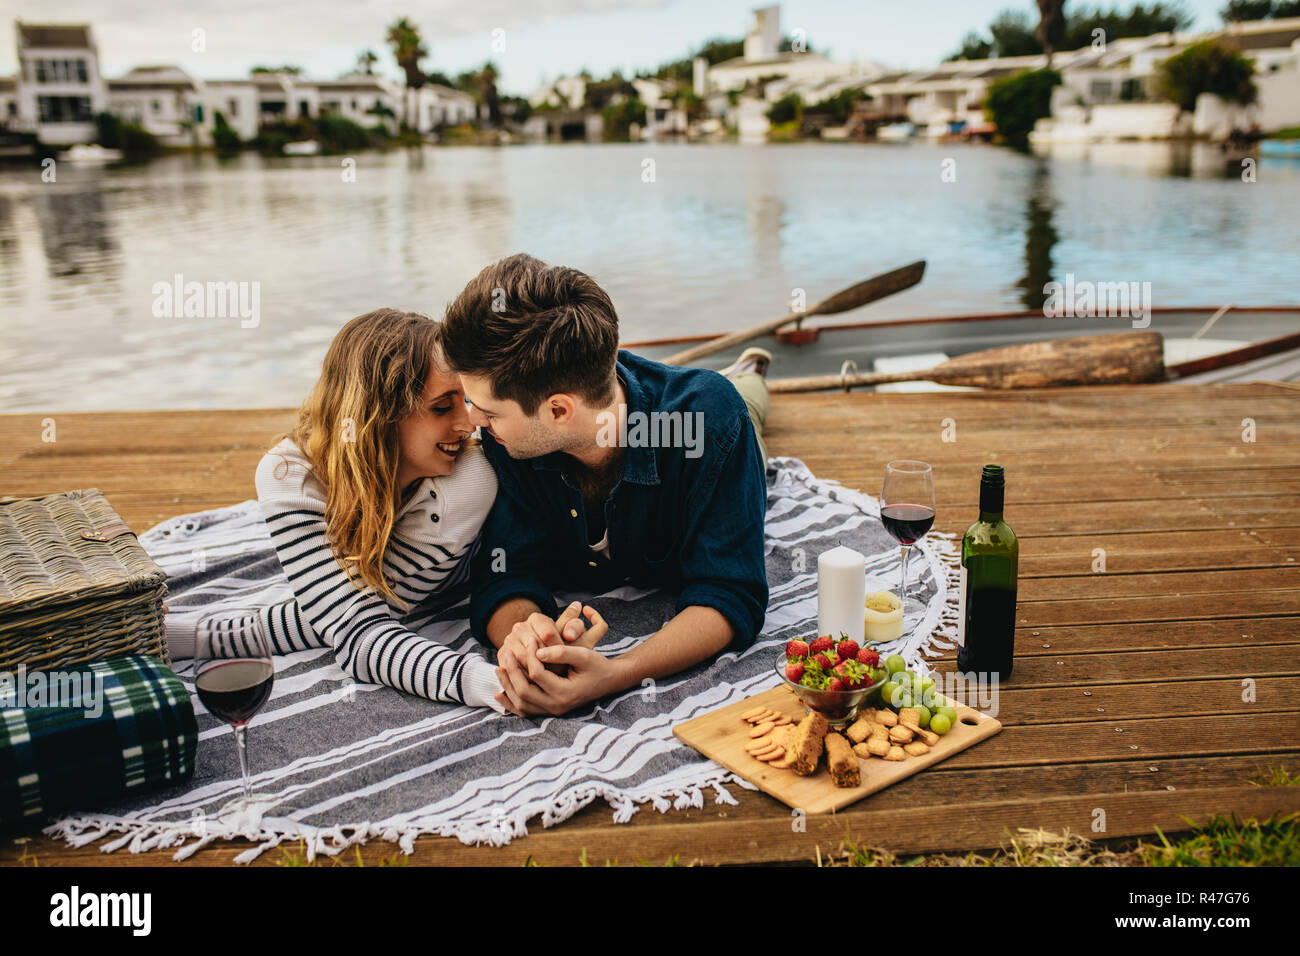 Romantic couple on a date kissing and spending time together lying near a lake. Man kissing his girlfriend lying on a wooden dock near a lake holding  Stock Photo